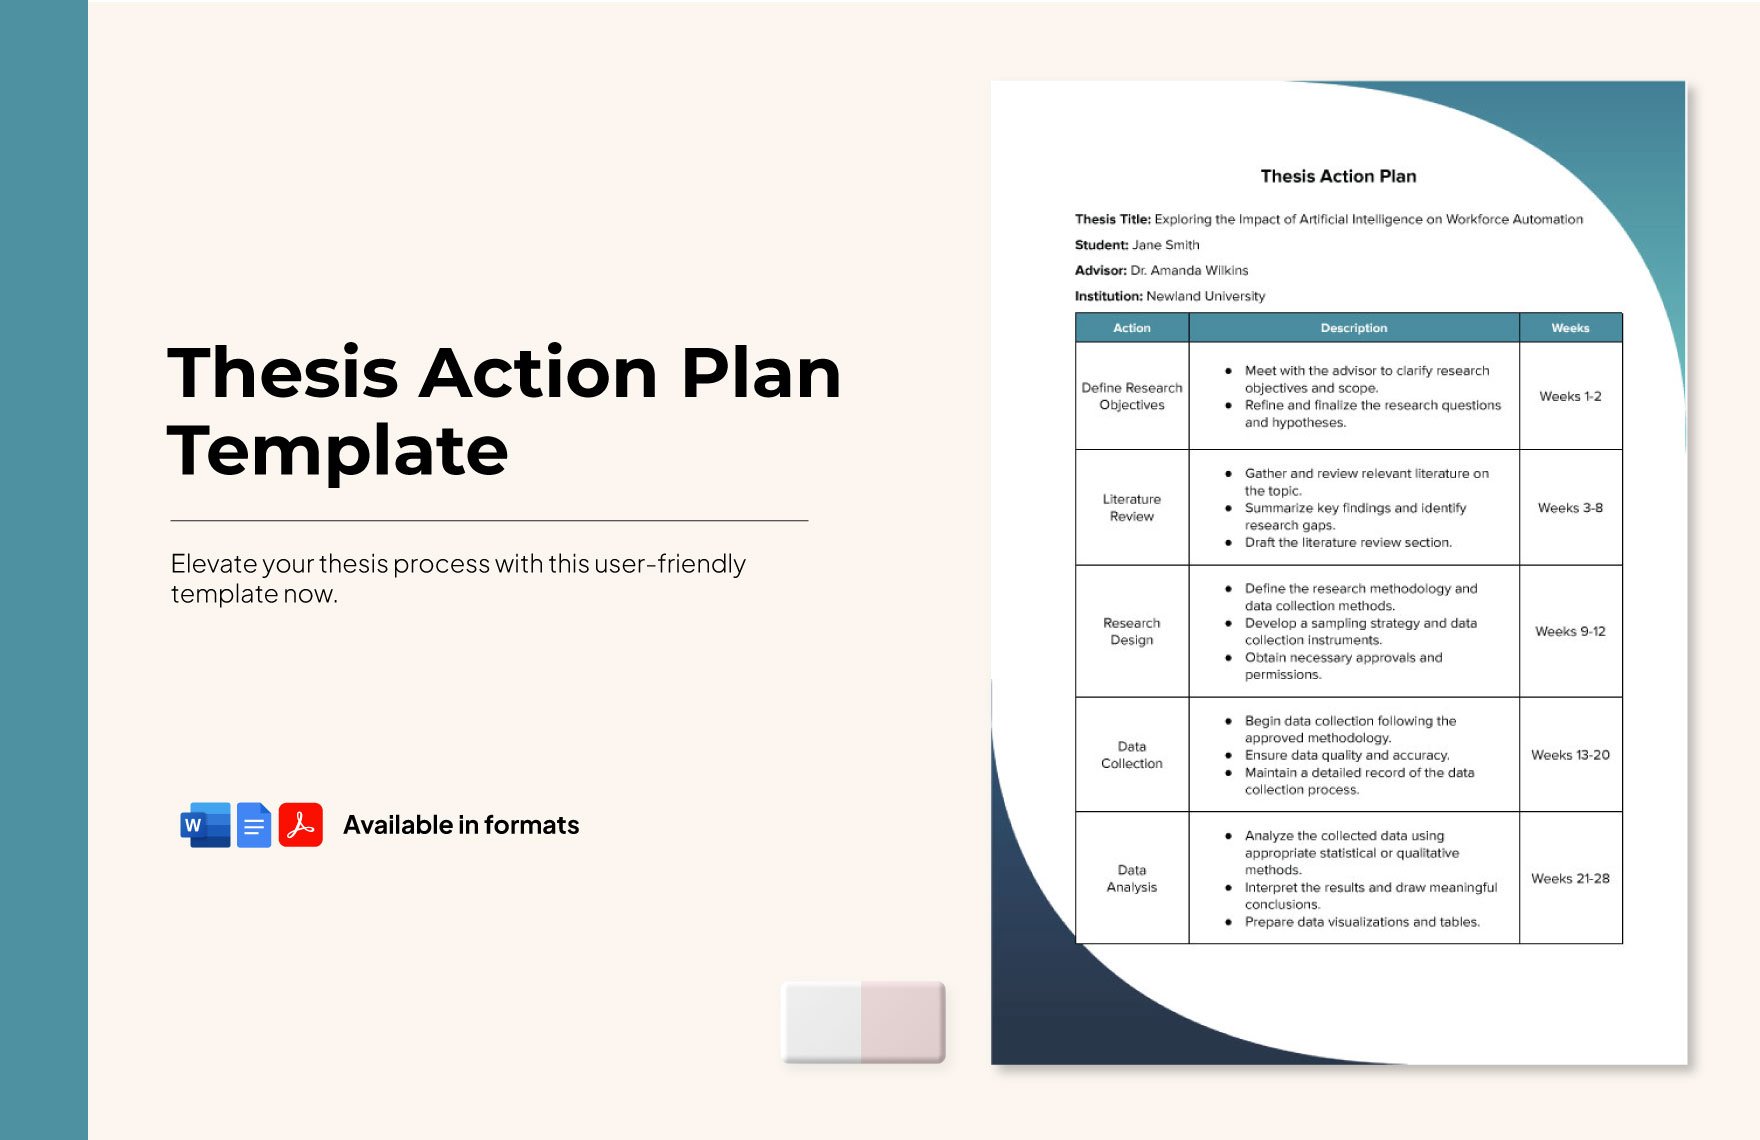 Thesis Action Plan Template in Word, Google Docs, PDF